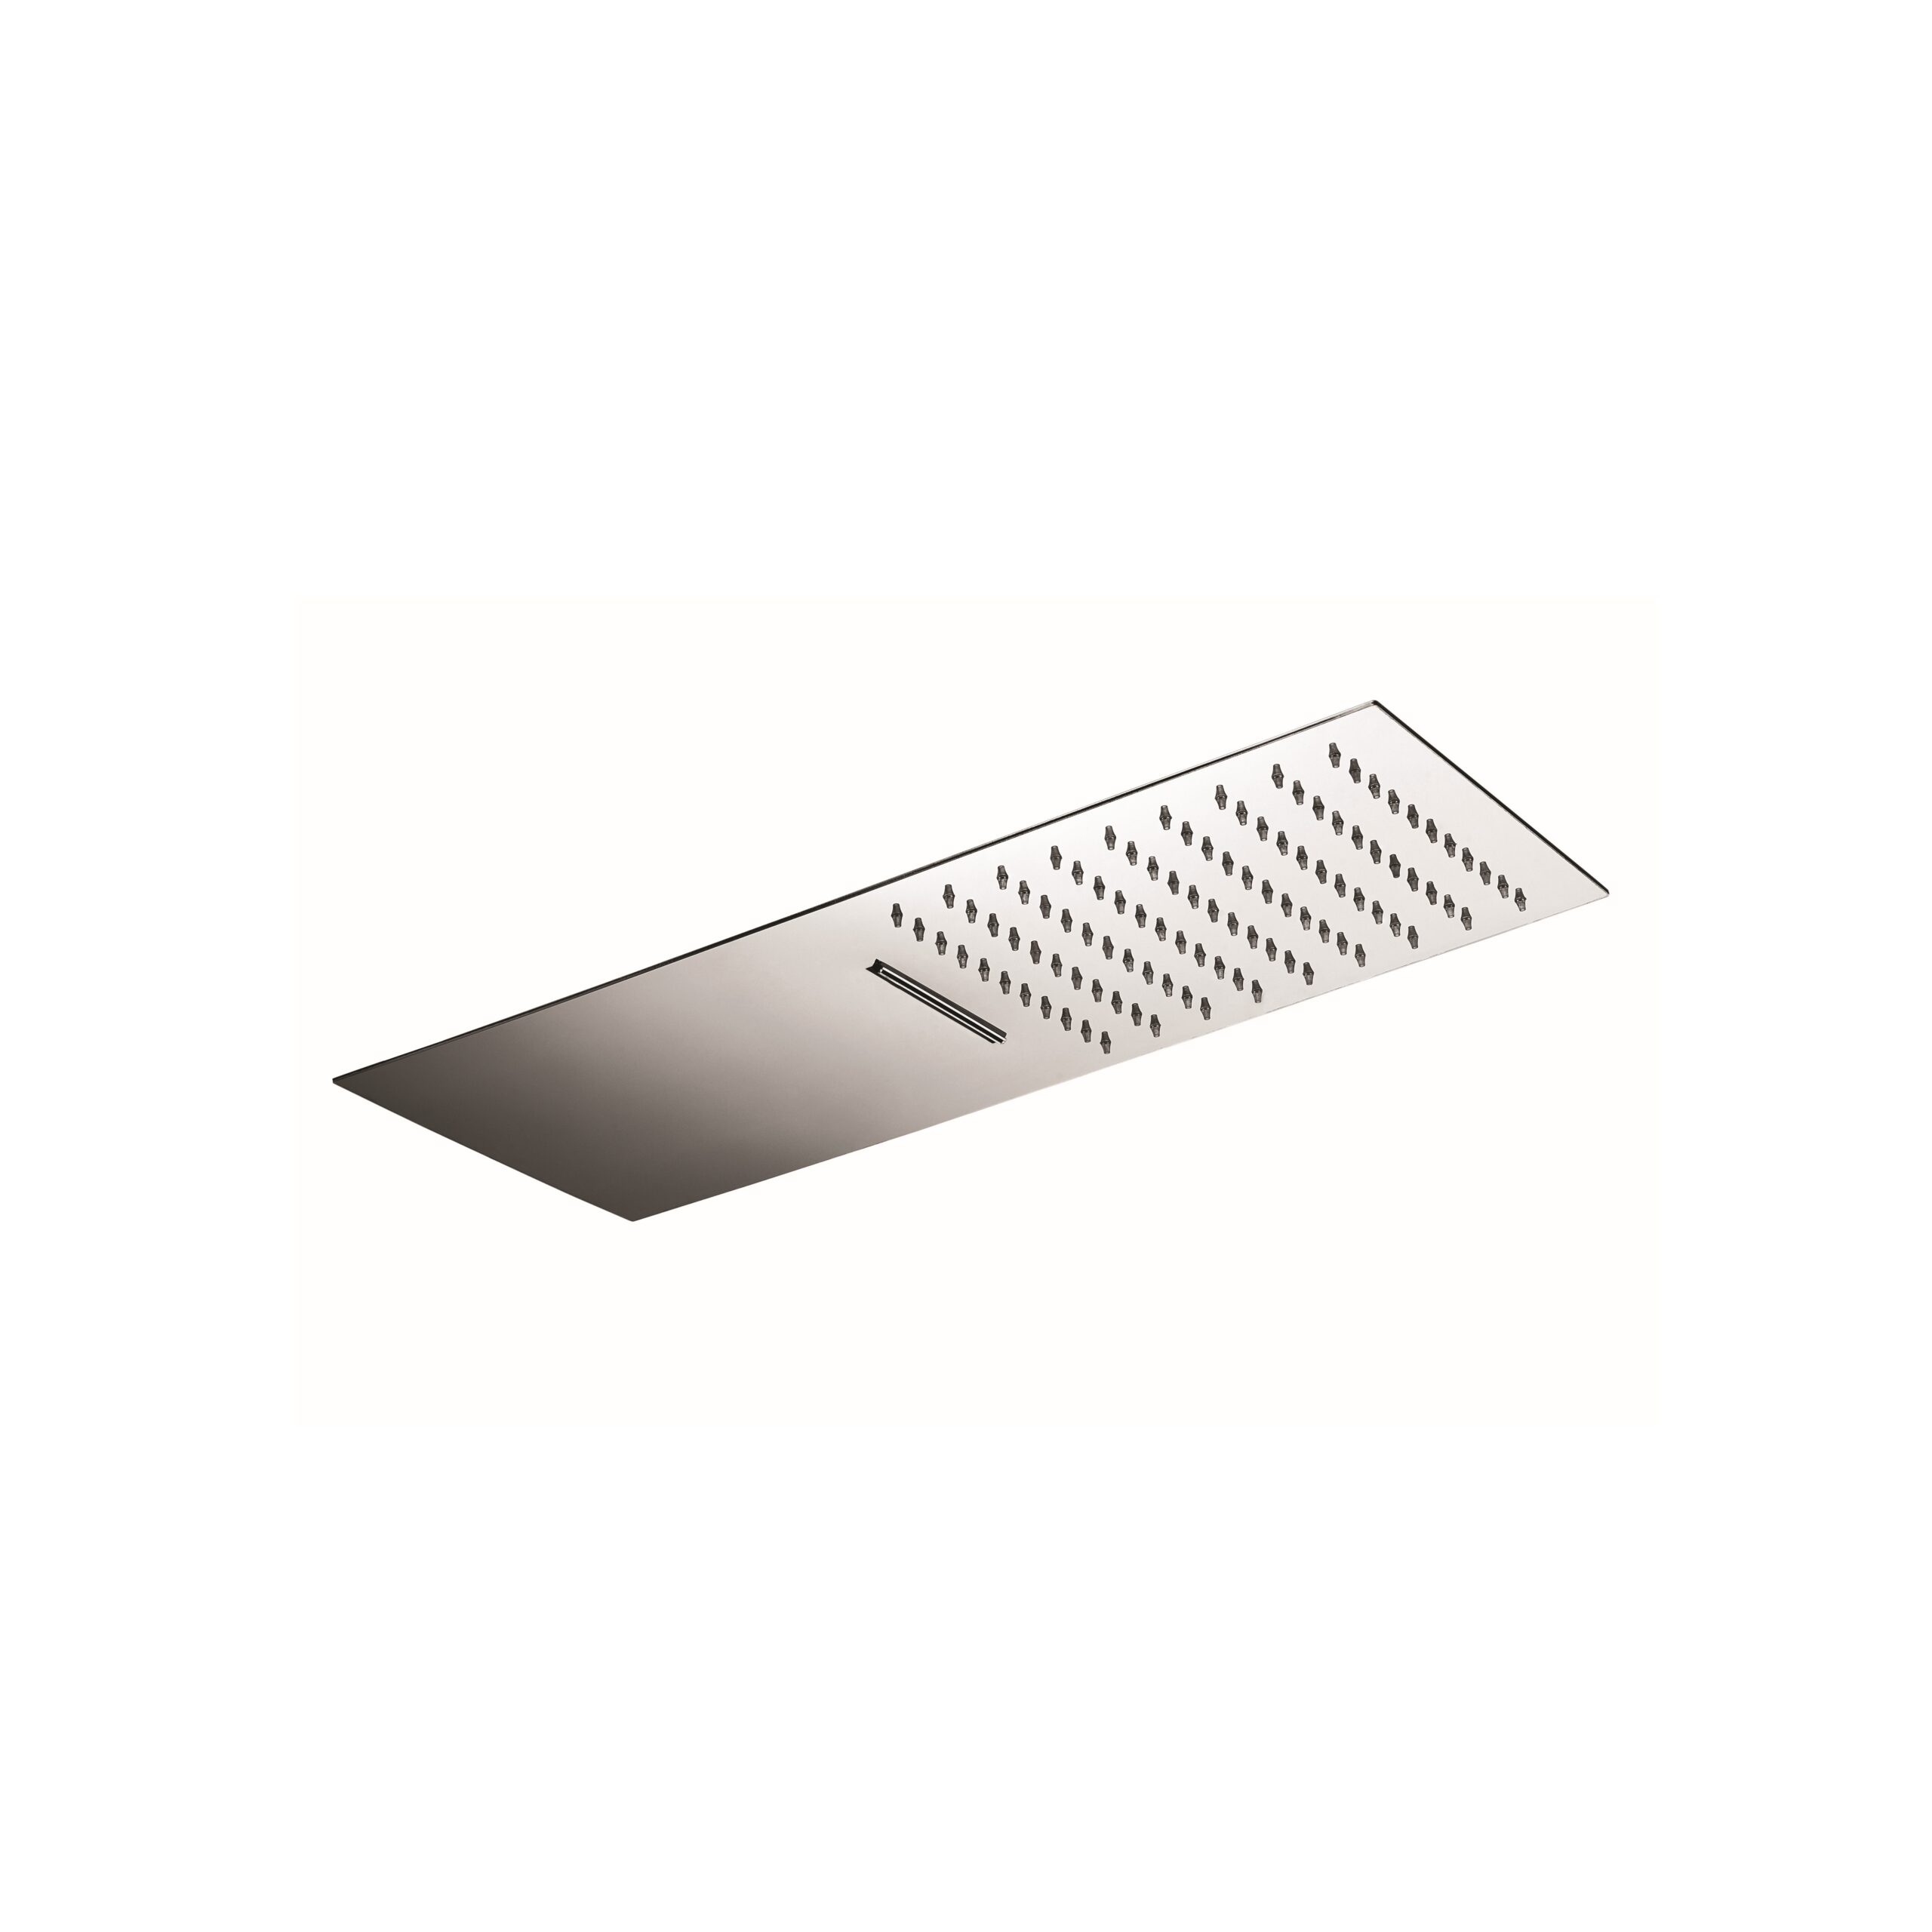 Evone Thin Rectangular Wall Mounted Rainfall Shower Head With Blade Waterfall by Rain Therapy